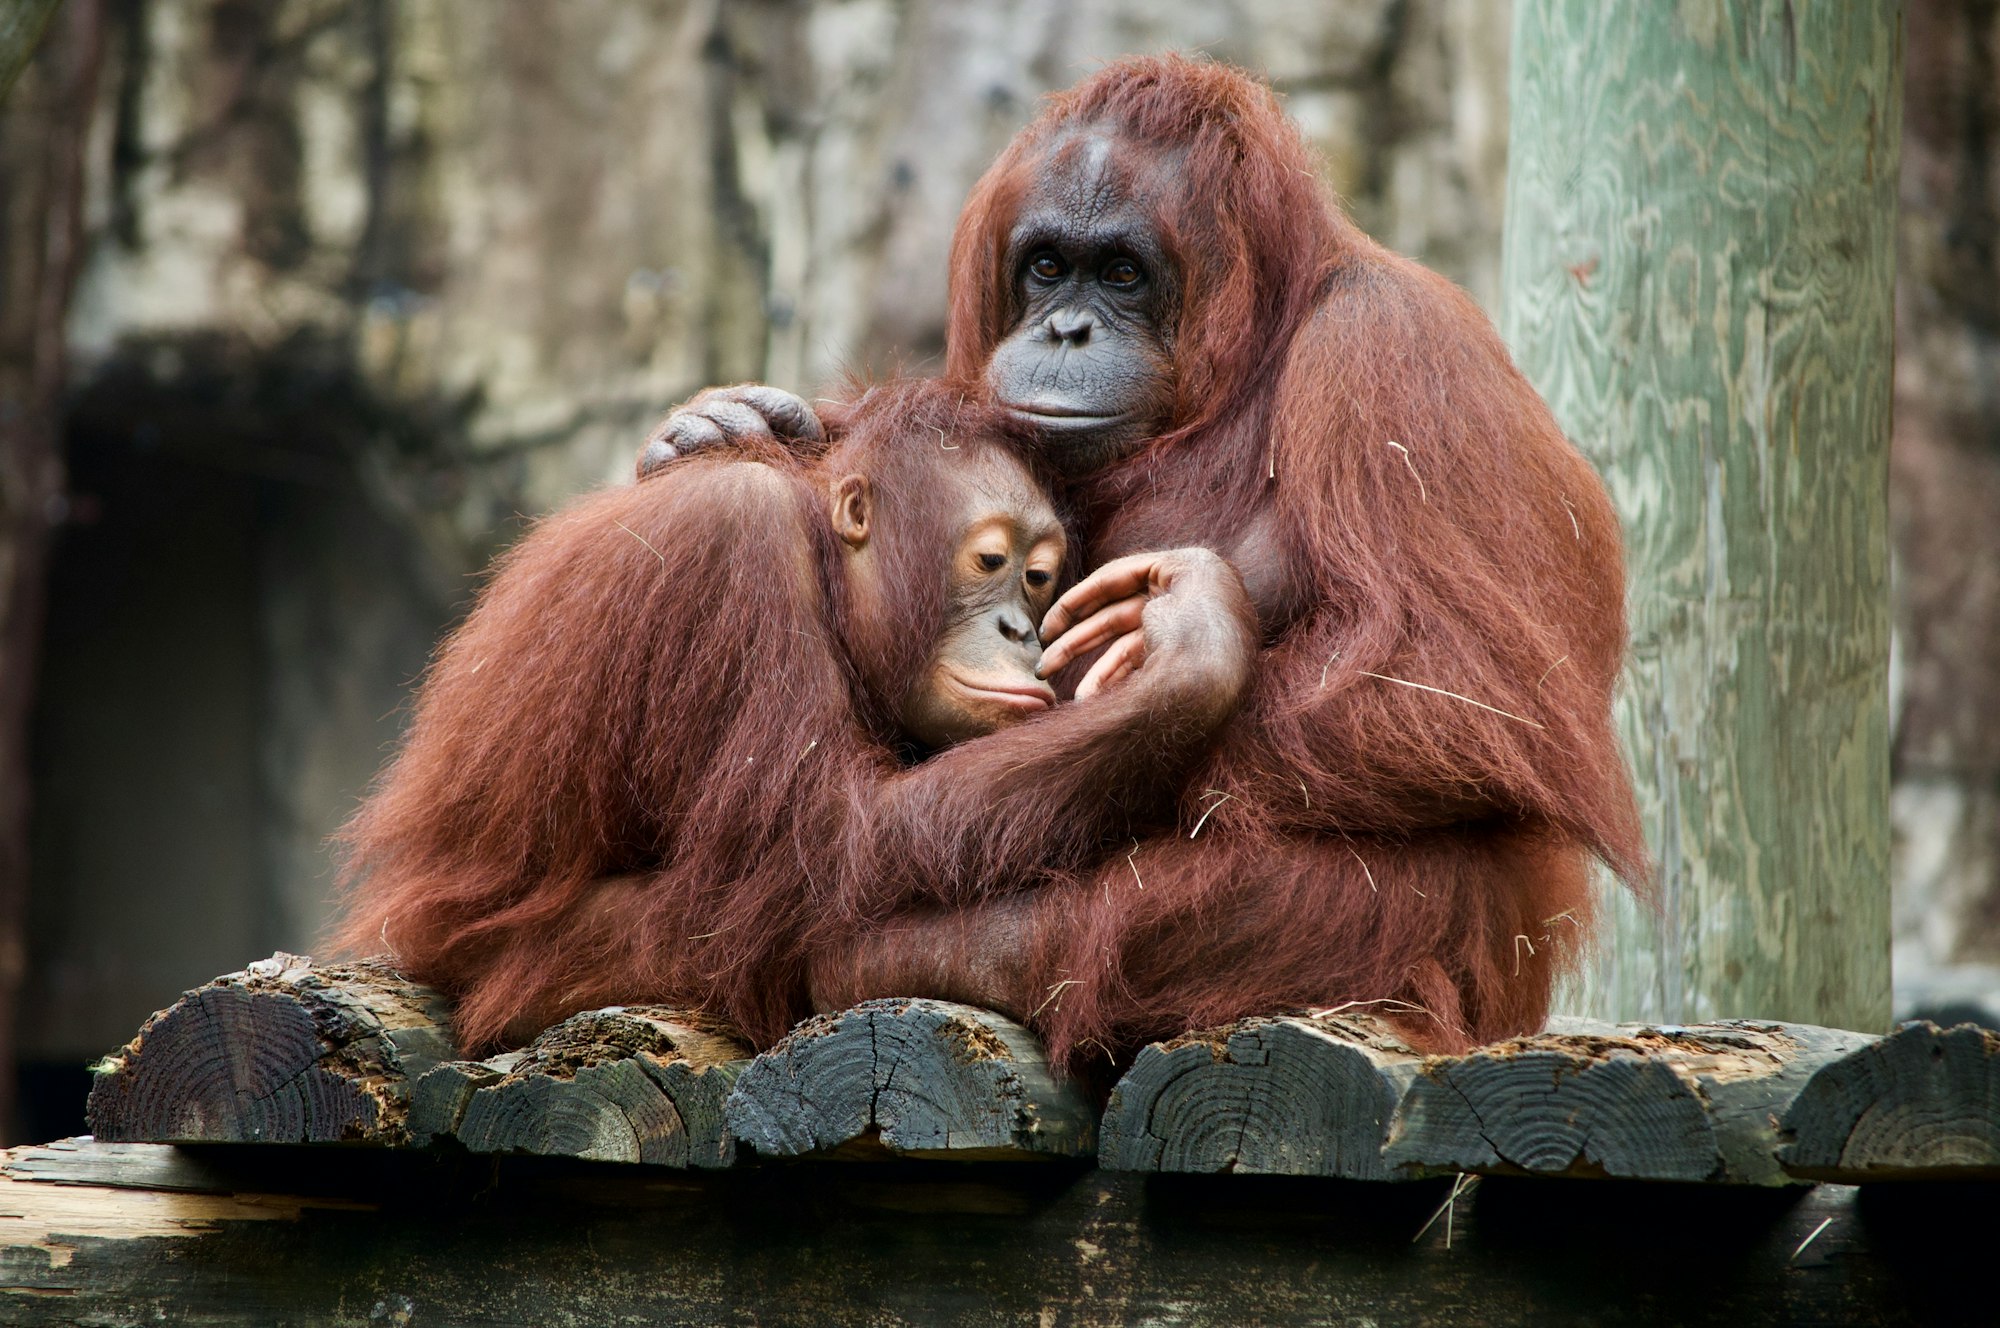 Mother and Child orangutans, which share an evolutionary common ancestor with humans